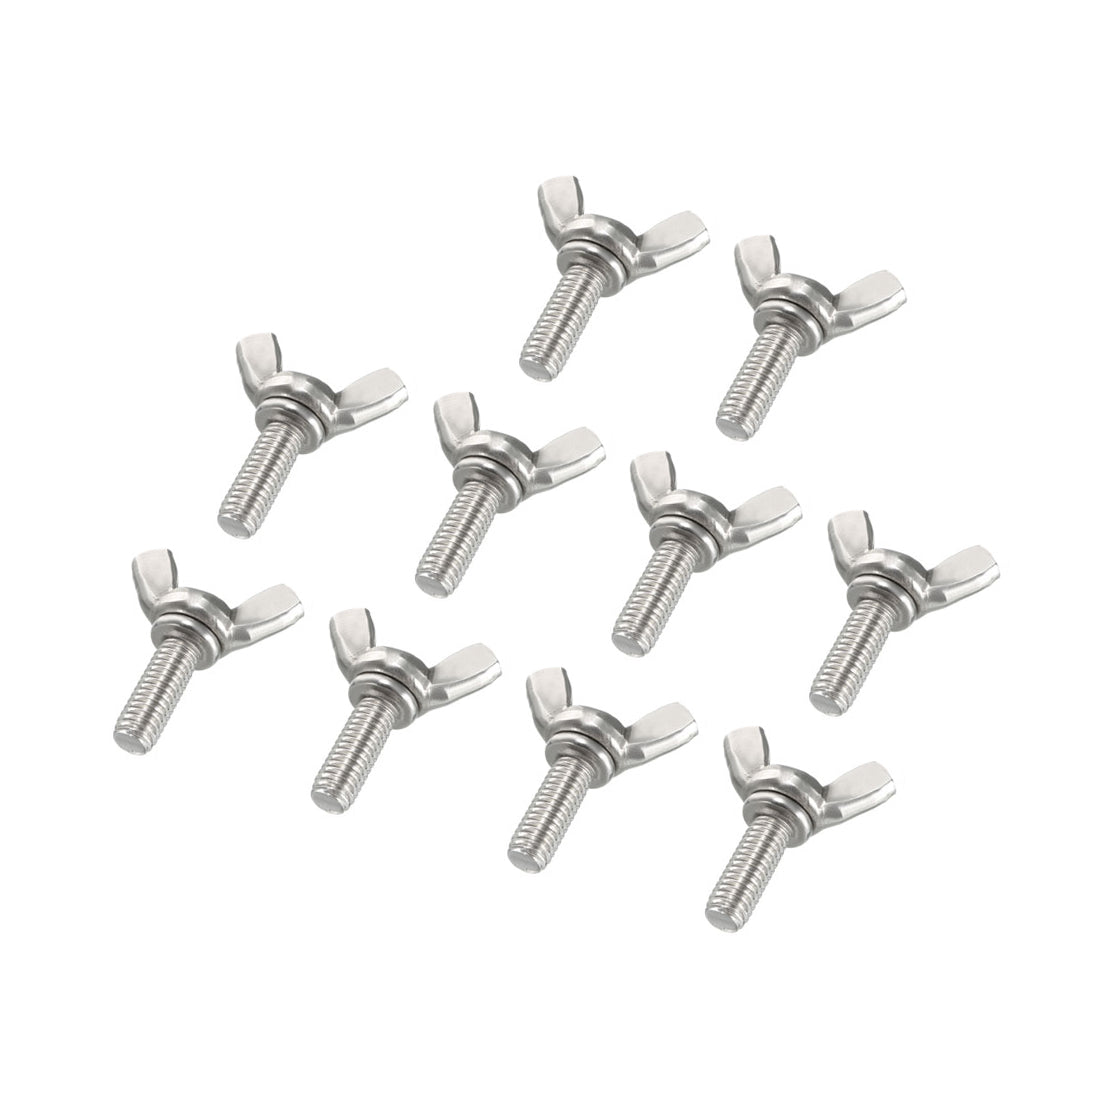 uxcell Uxcell Wingbolt Butterfly Wing Thumb Hand Screws Bolts M6x16mm 1mm Pitch Carbon Steel 10pcs